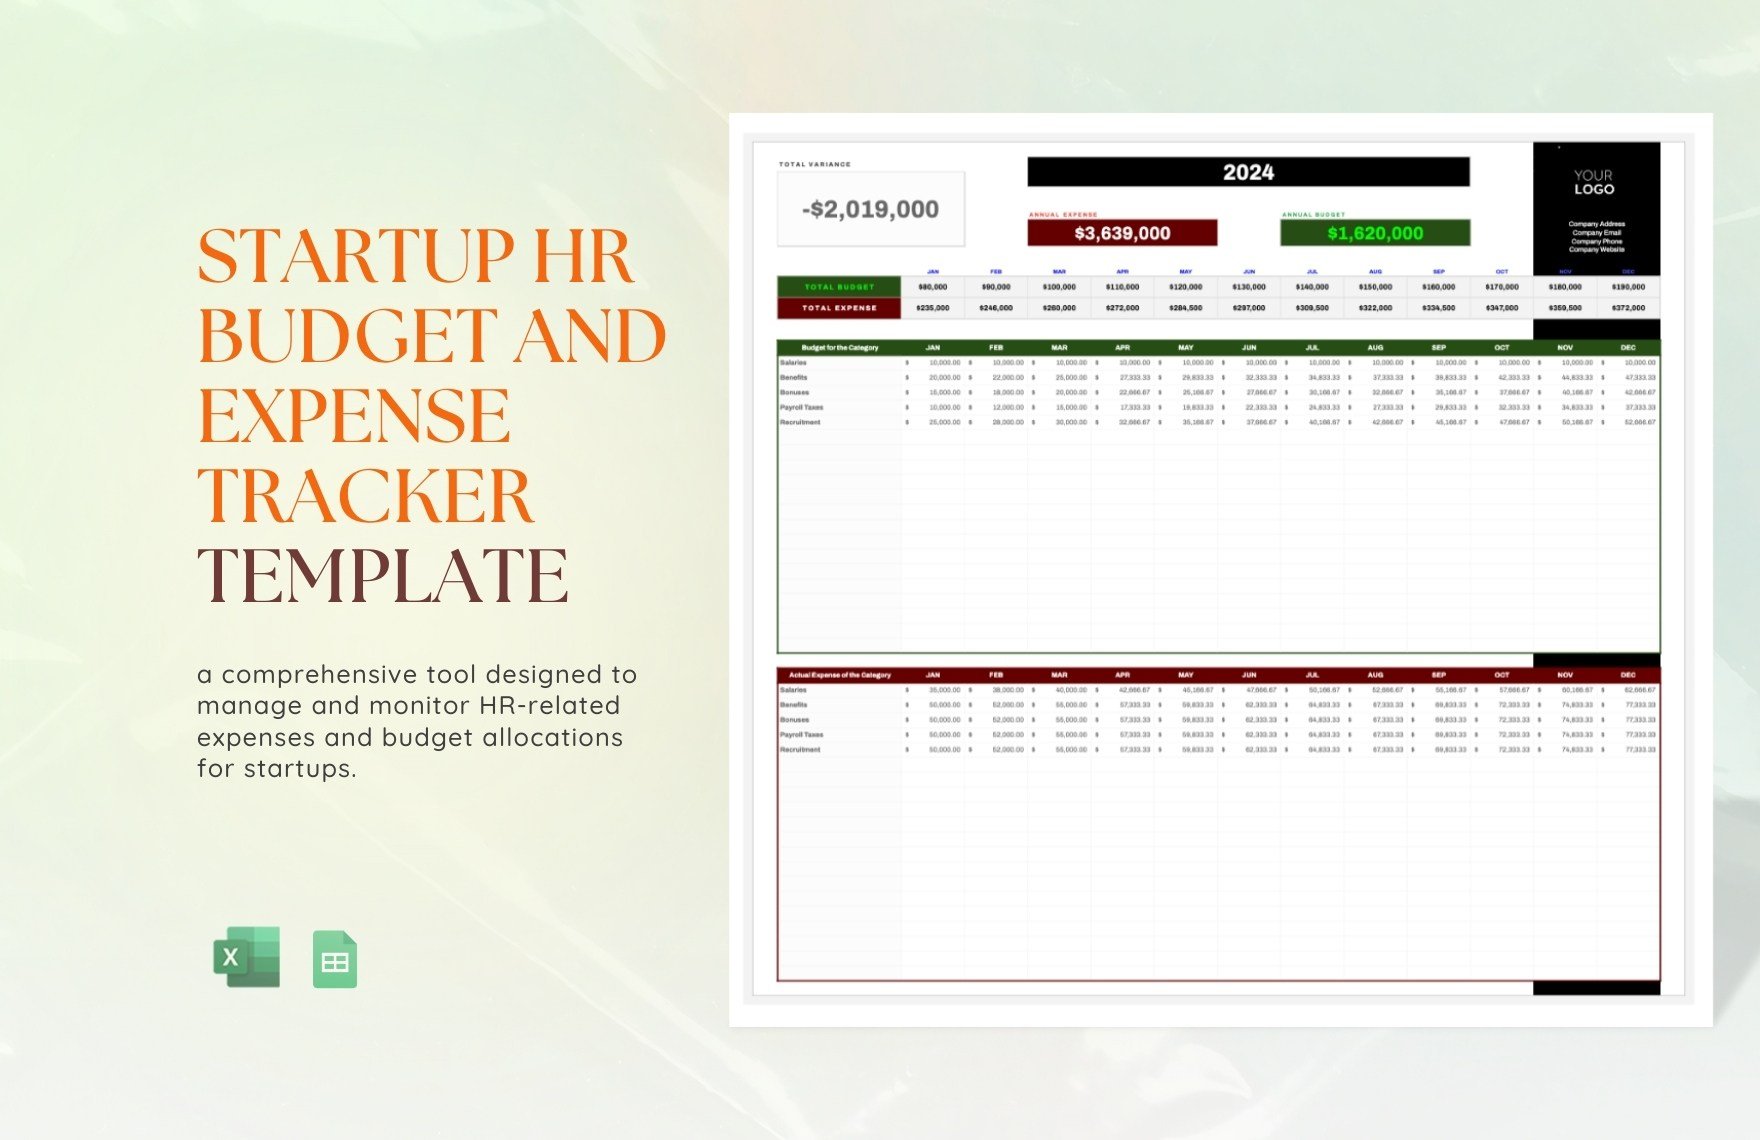 Startup HR Budget and Expense Tracker Template in Excel, Google Sheets